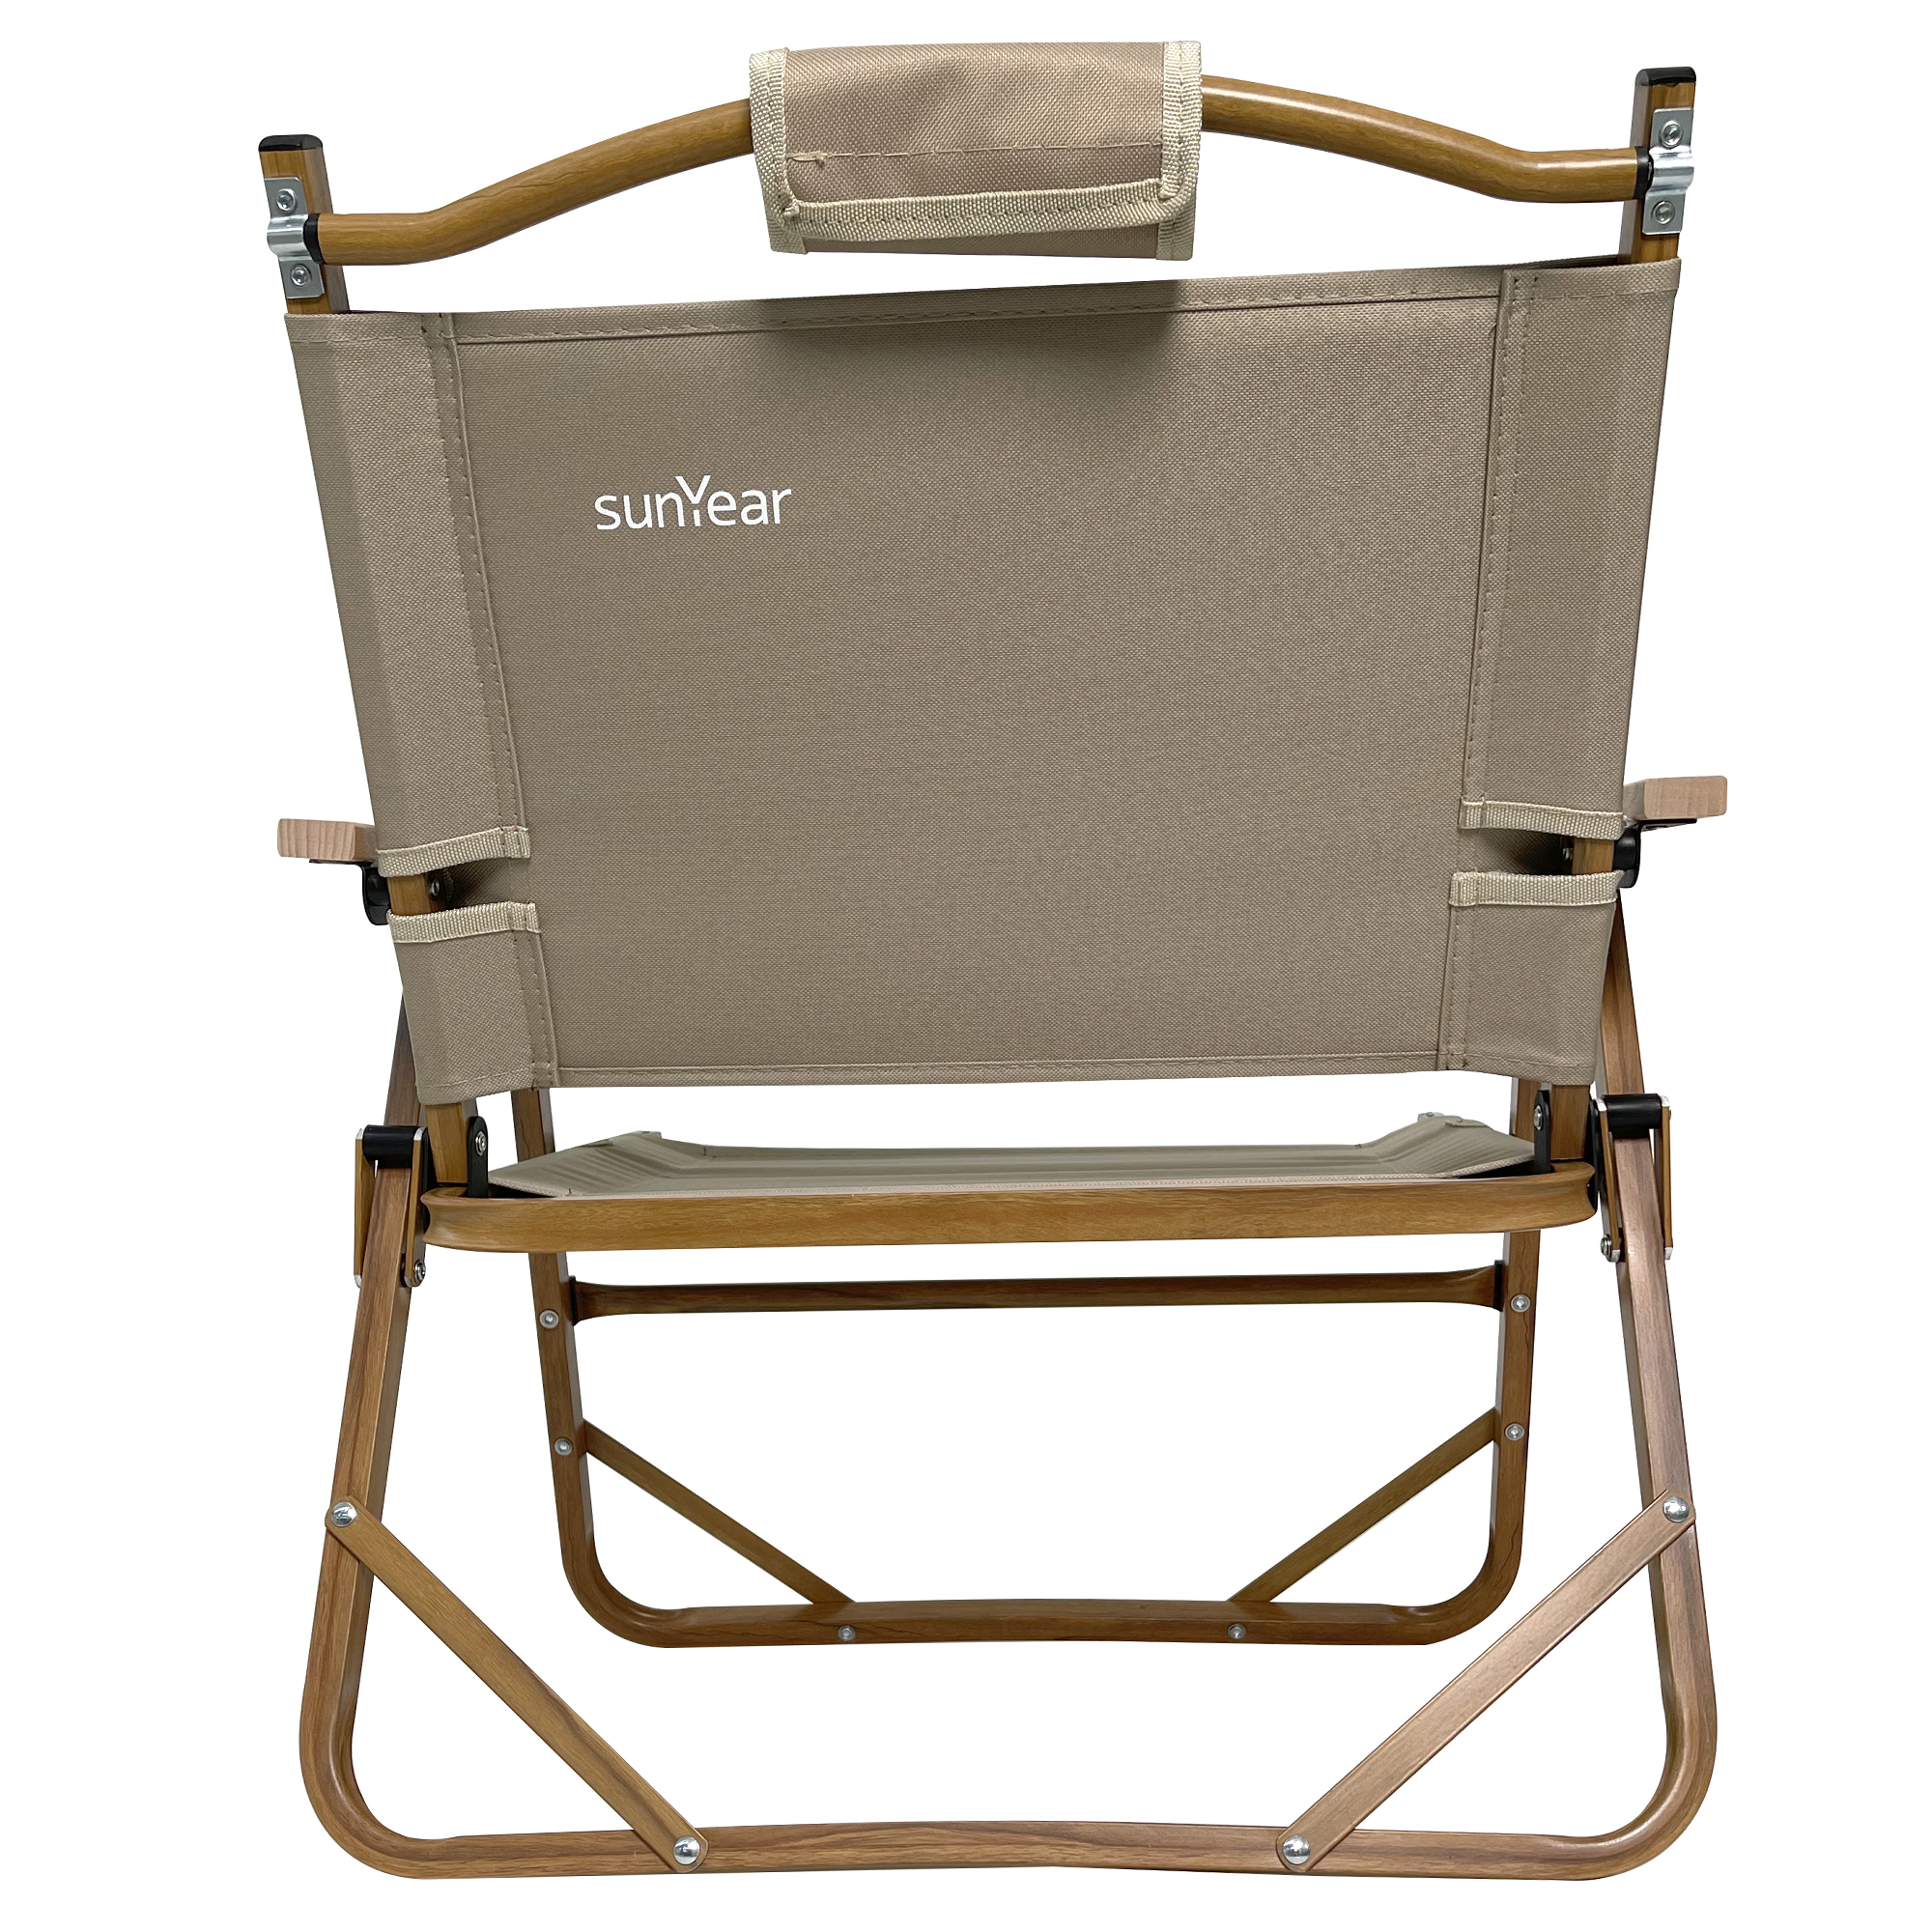 US$ 79.99 - Sunyear Camping Chairs Kermit Chair - Outdoor